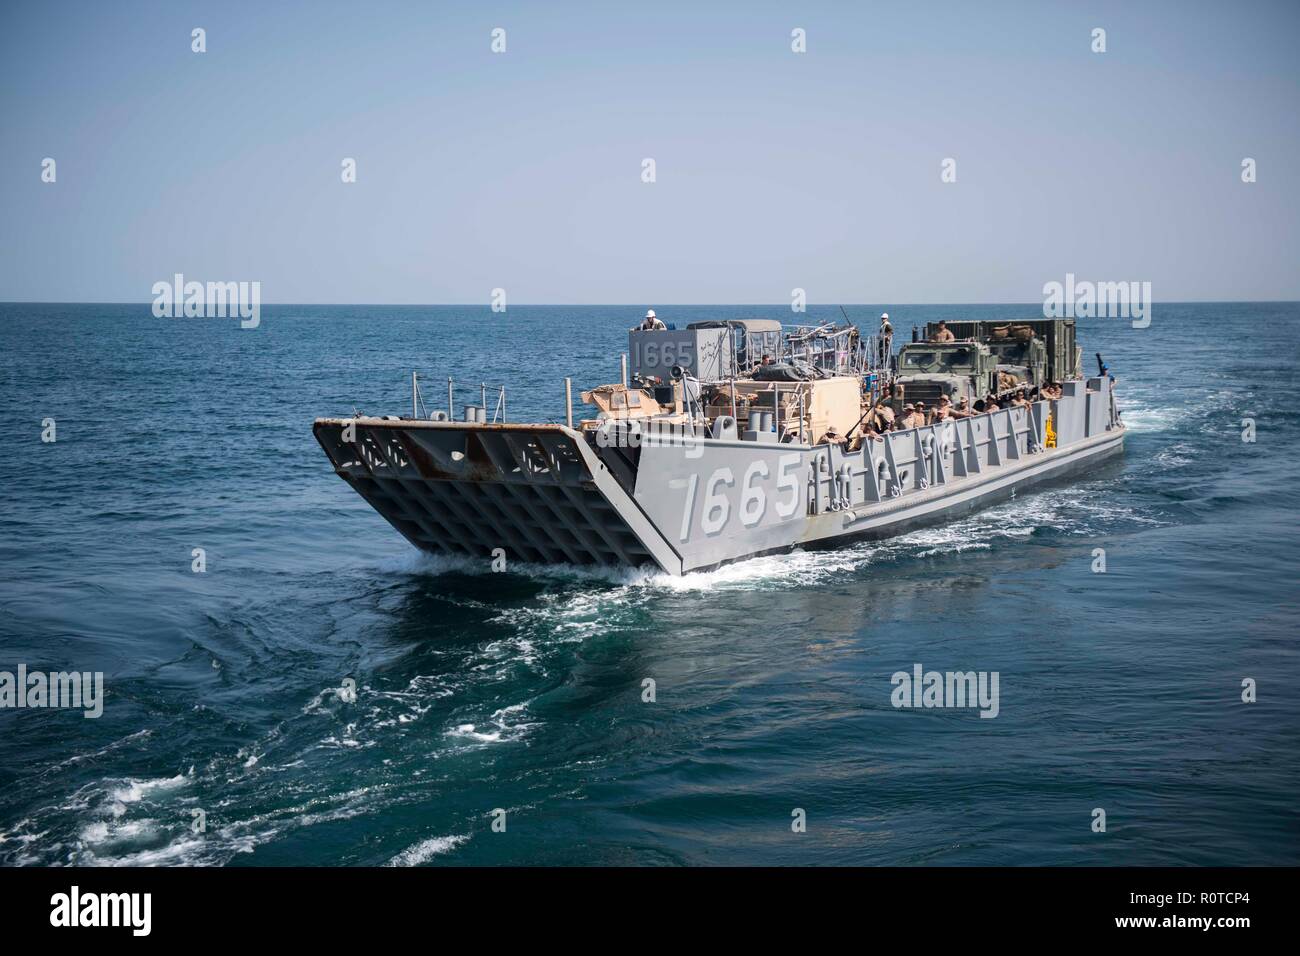 181105-N-GR847-2006 ARABIAN GULF (Nov. 5, 2018) Landing Craft Utility 1665, attached to Assault Craft Unit (ACU) 1, transits the Arabian Gulf during a regularly scheduled deployment of the Essex Amphibious Ready Group (ARG) and 13th Marine Expeditionary Unit (MEU). The Essex ARG/13th MEU is a flexible and persistent Navy-Marine Corps team deployed to the U.S. 5th Fleet area of operations in support of naval operations to ensure maritime stability and security in the Central Region, connecting to the Mediterranean and the Pacific through the western Indian Ocean and three strategic choke points Stock Photo